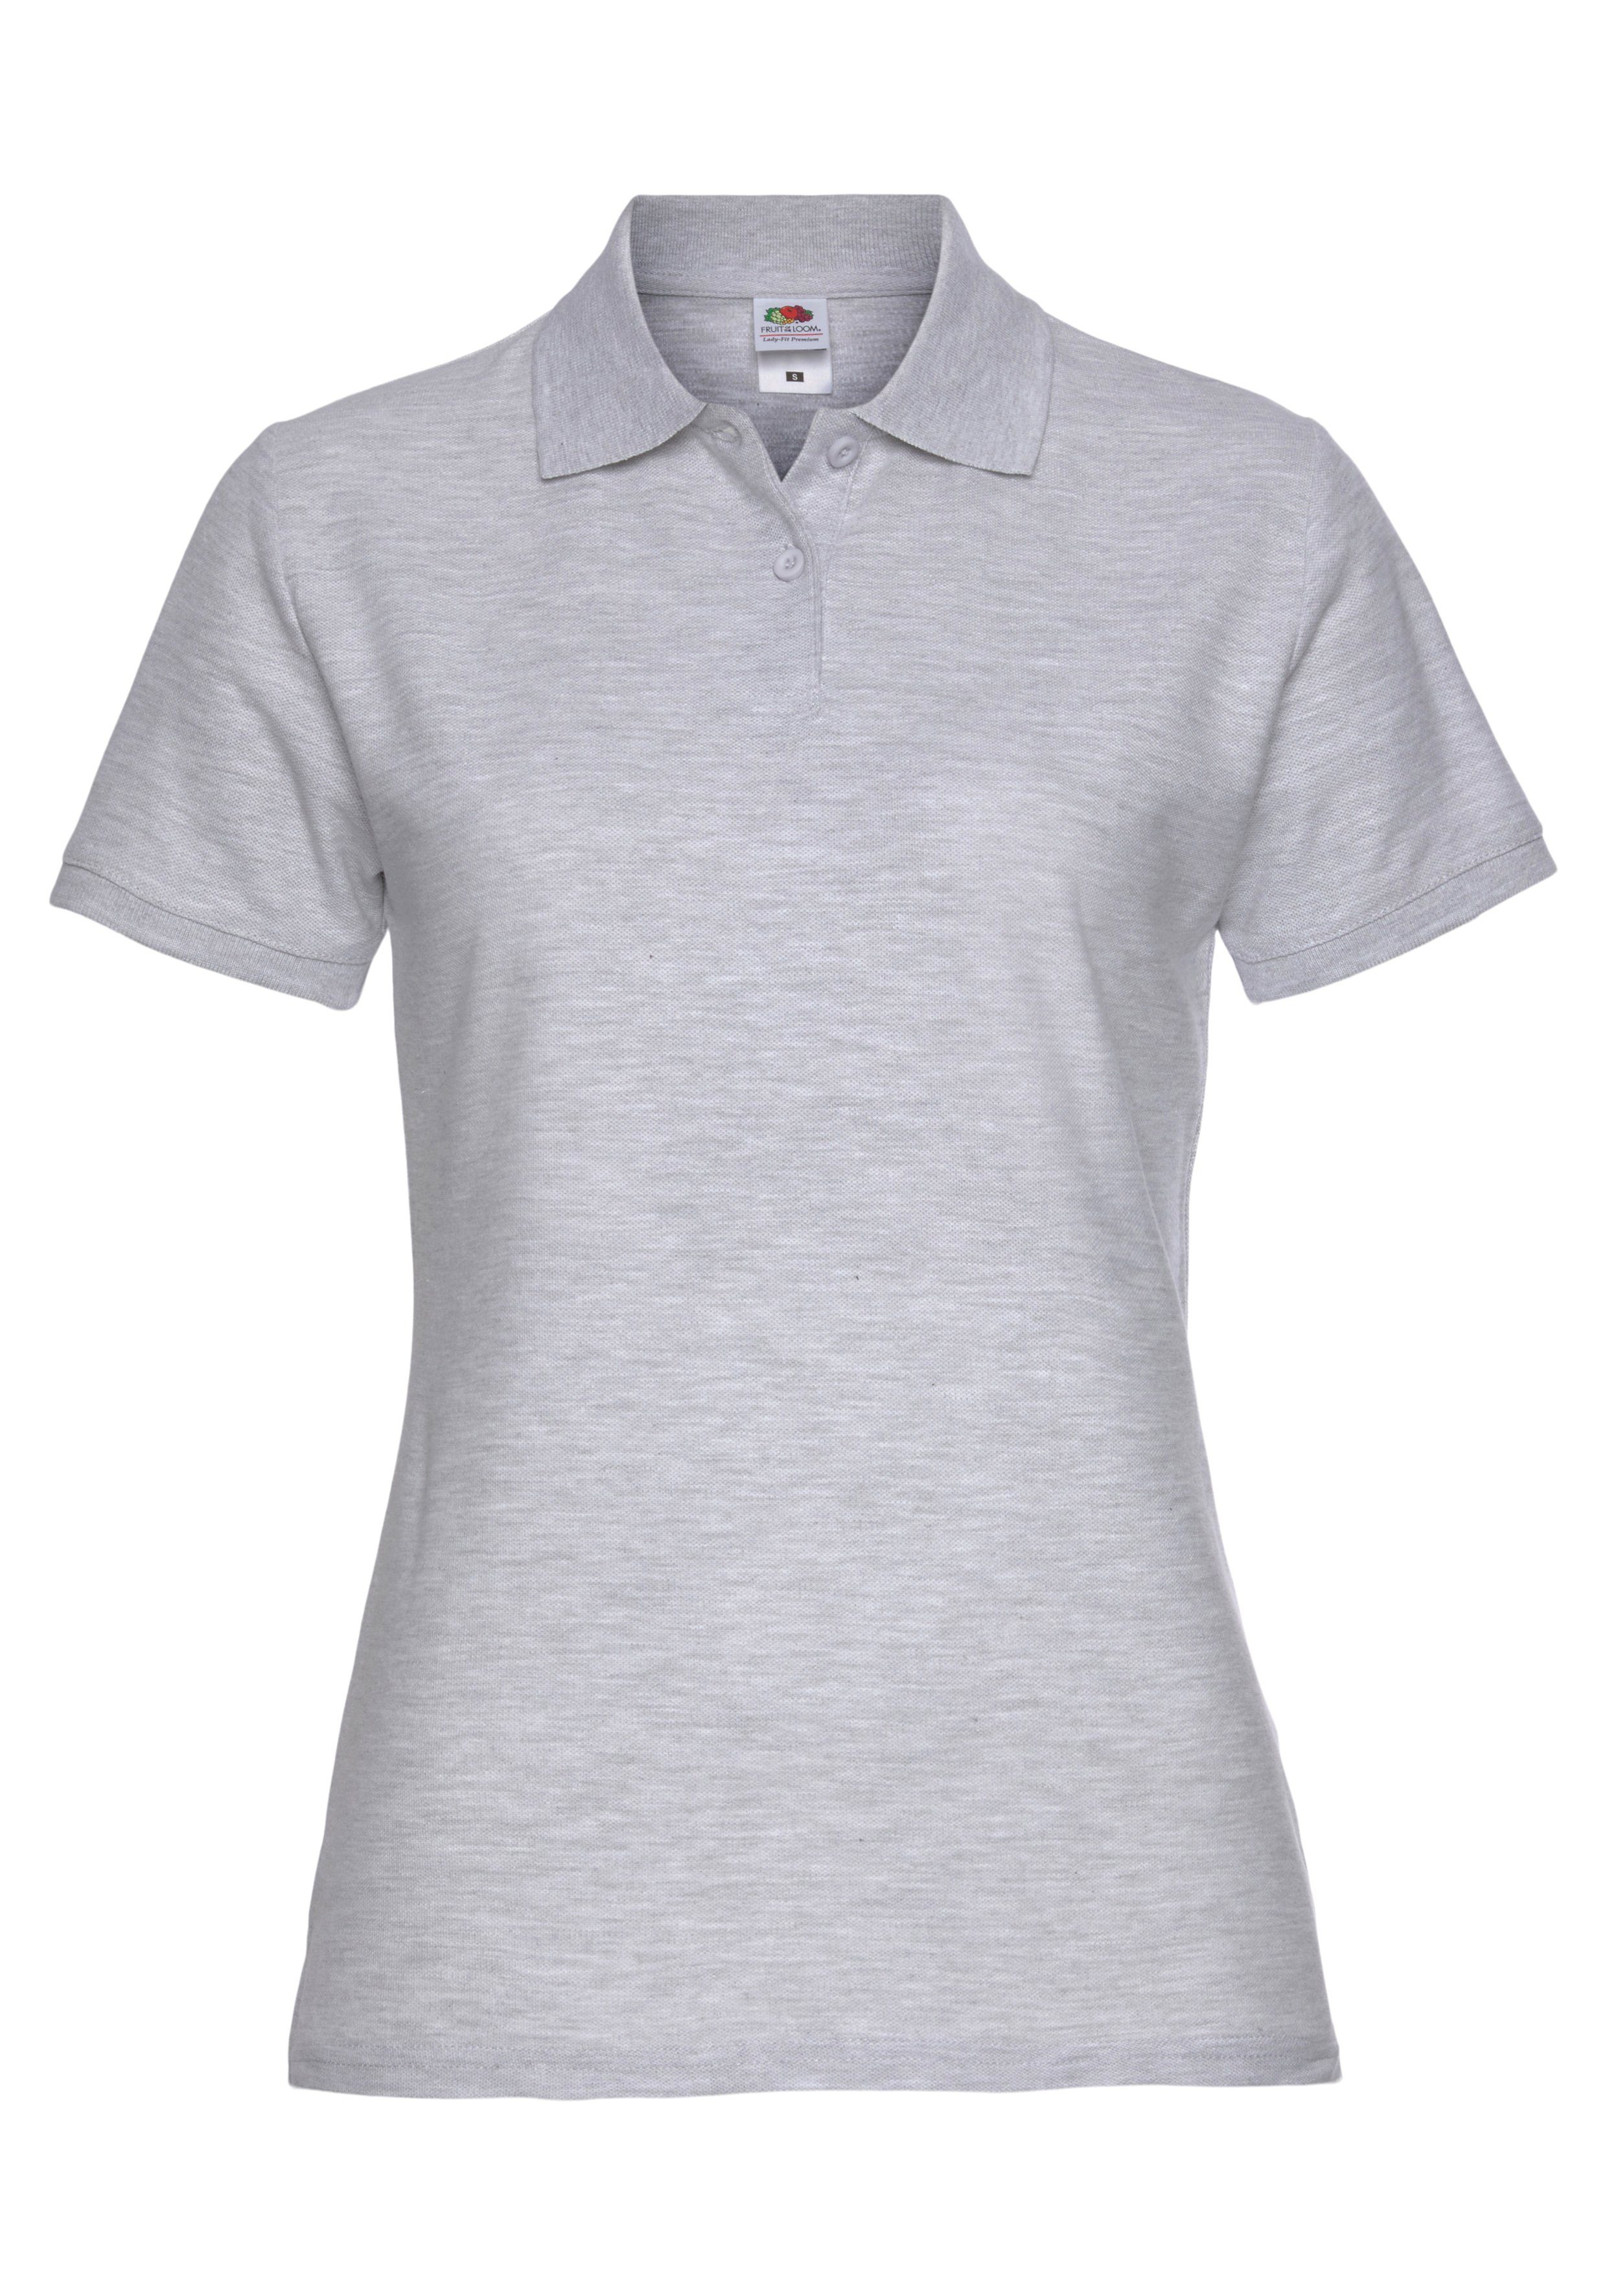 Poloshirt the Fruit Polo of graumeliert Premium Loom Lady-Fit